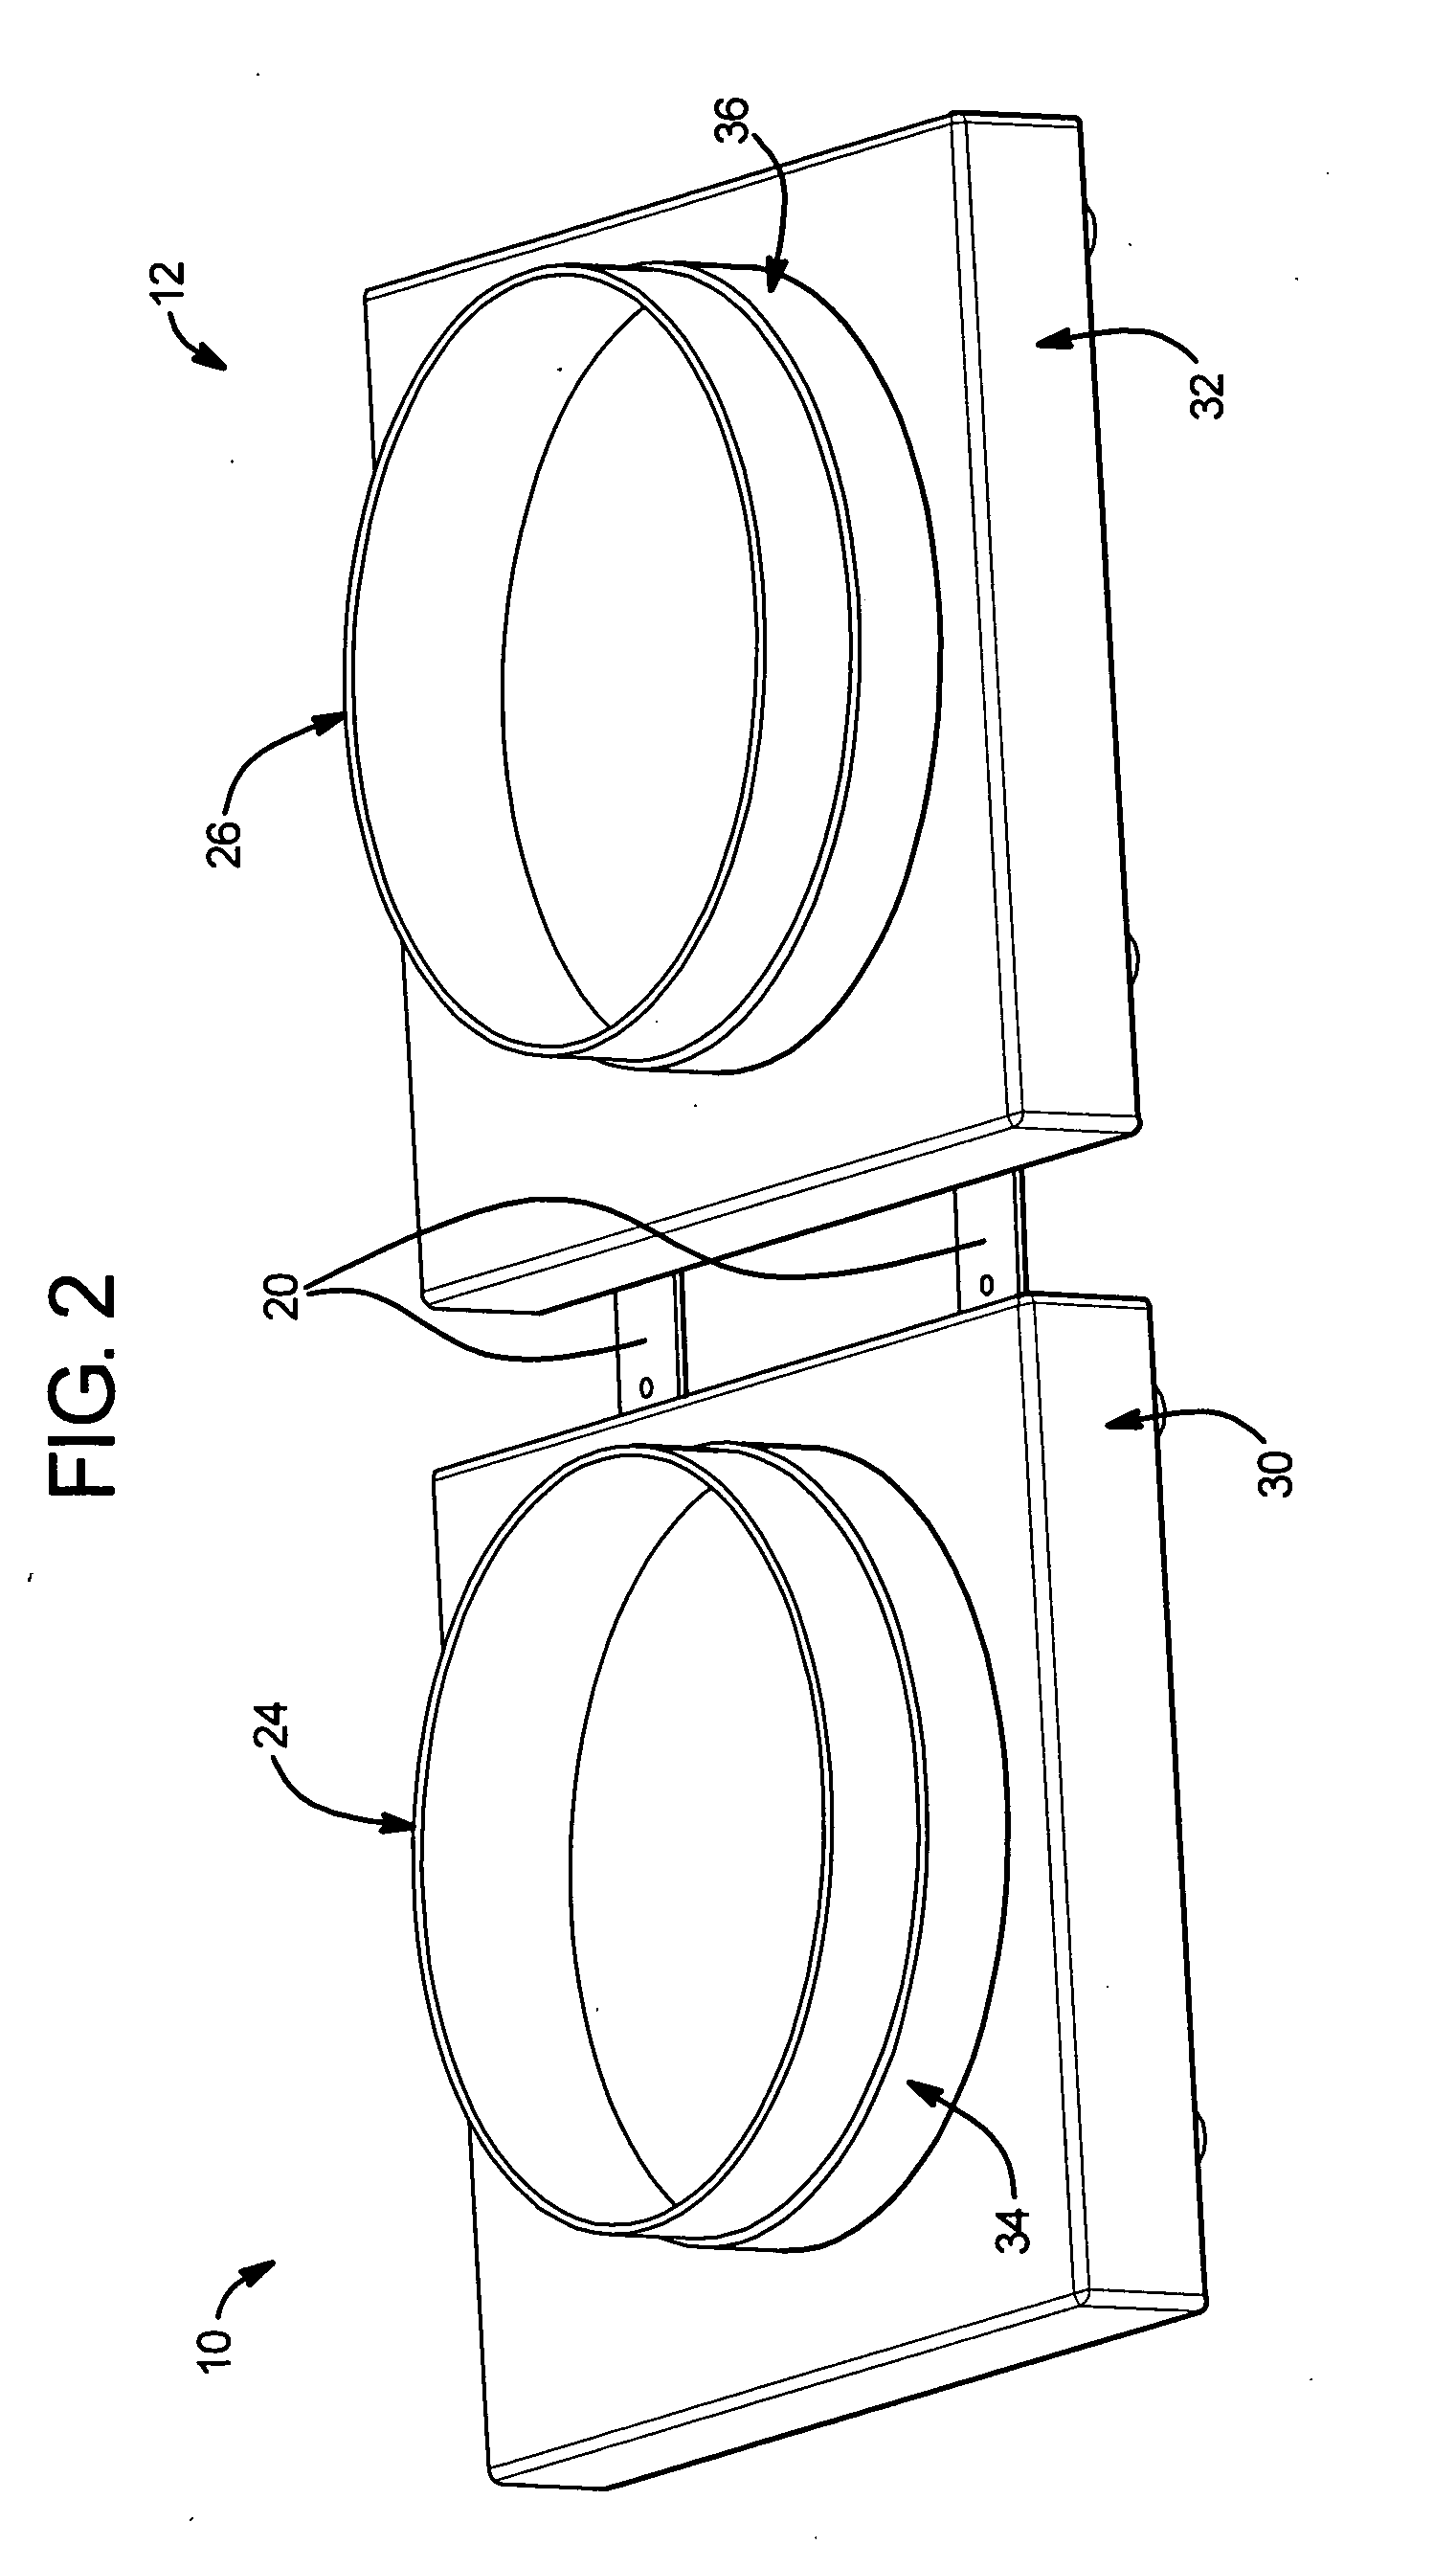 Remote data collecting systems and methods